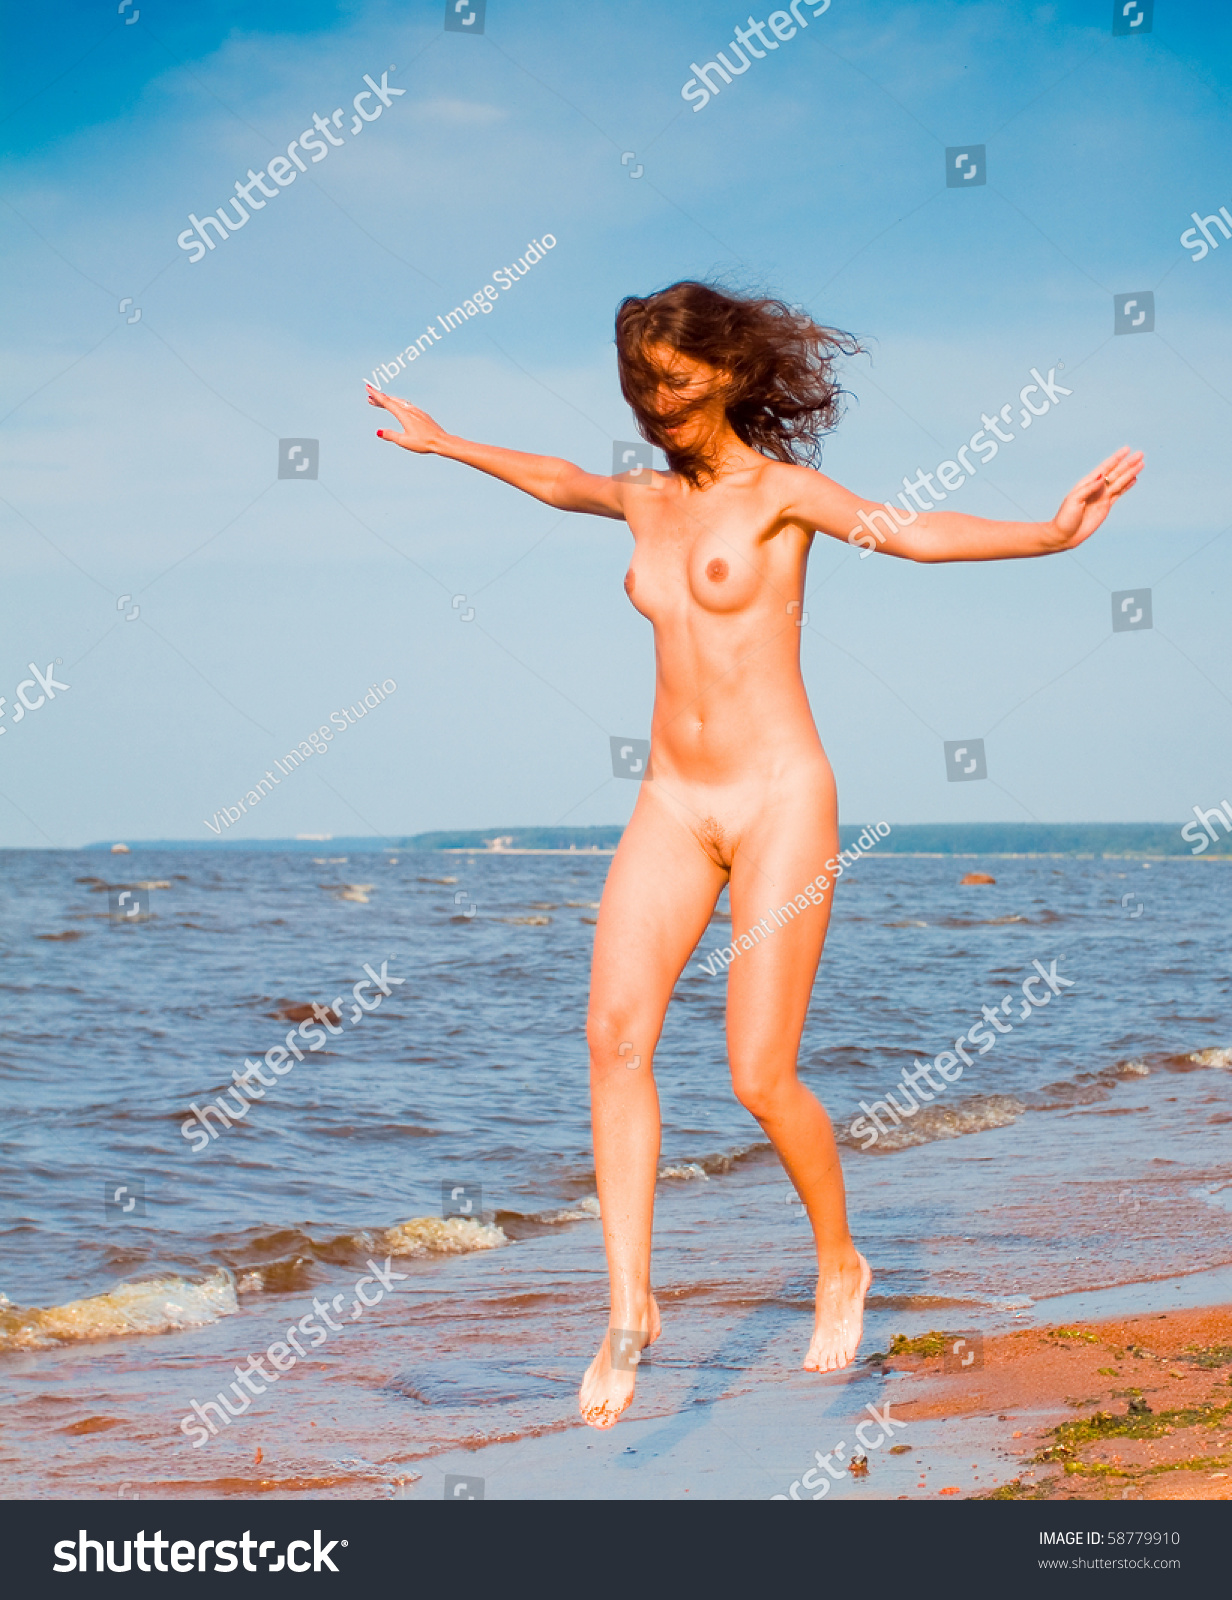 Women Exercising In The Nude 56